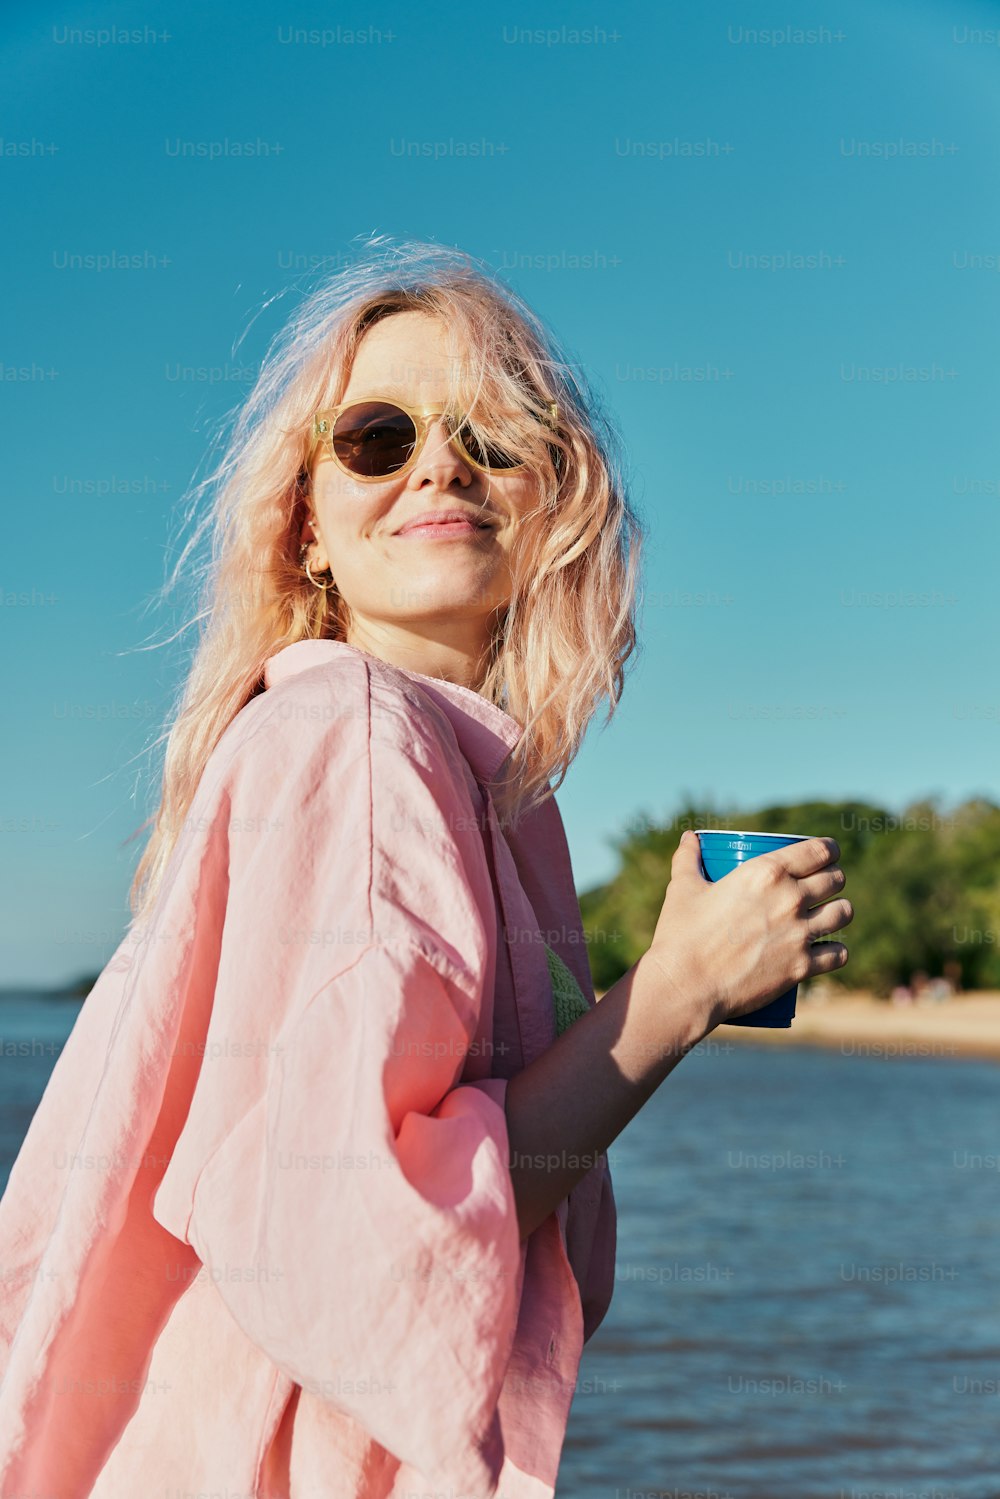 a woman in a pink shirt and sunglasses holding a cup of coffee